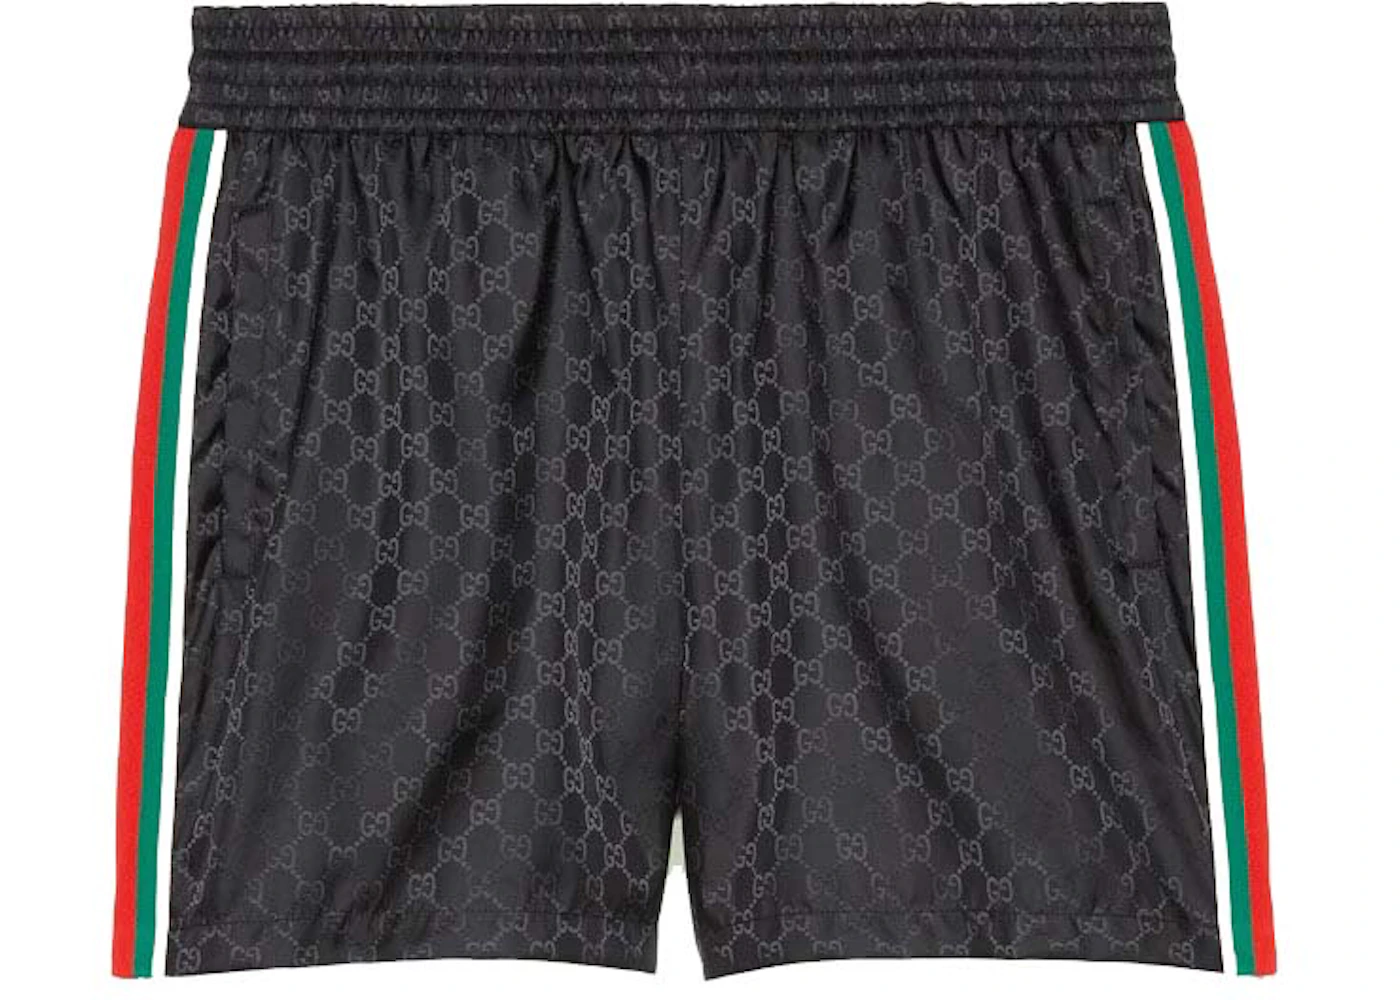 And so on meat deal with Gucci GG Jacquard Nylon Swim Shorts Black - GB